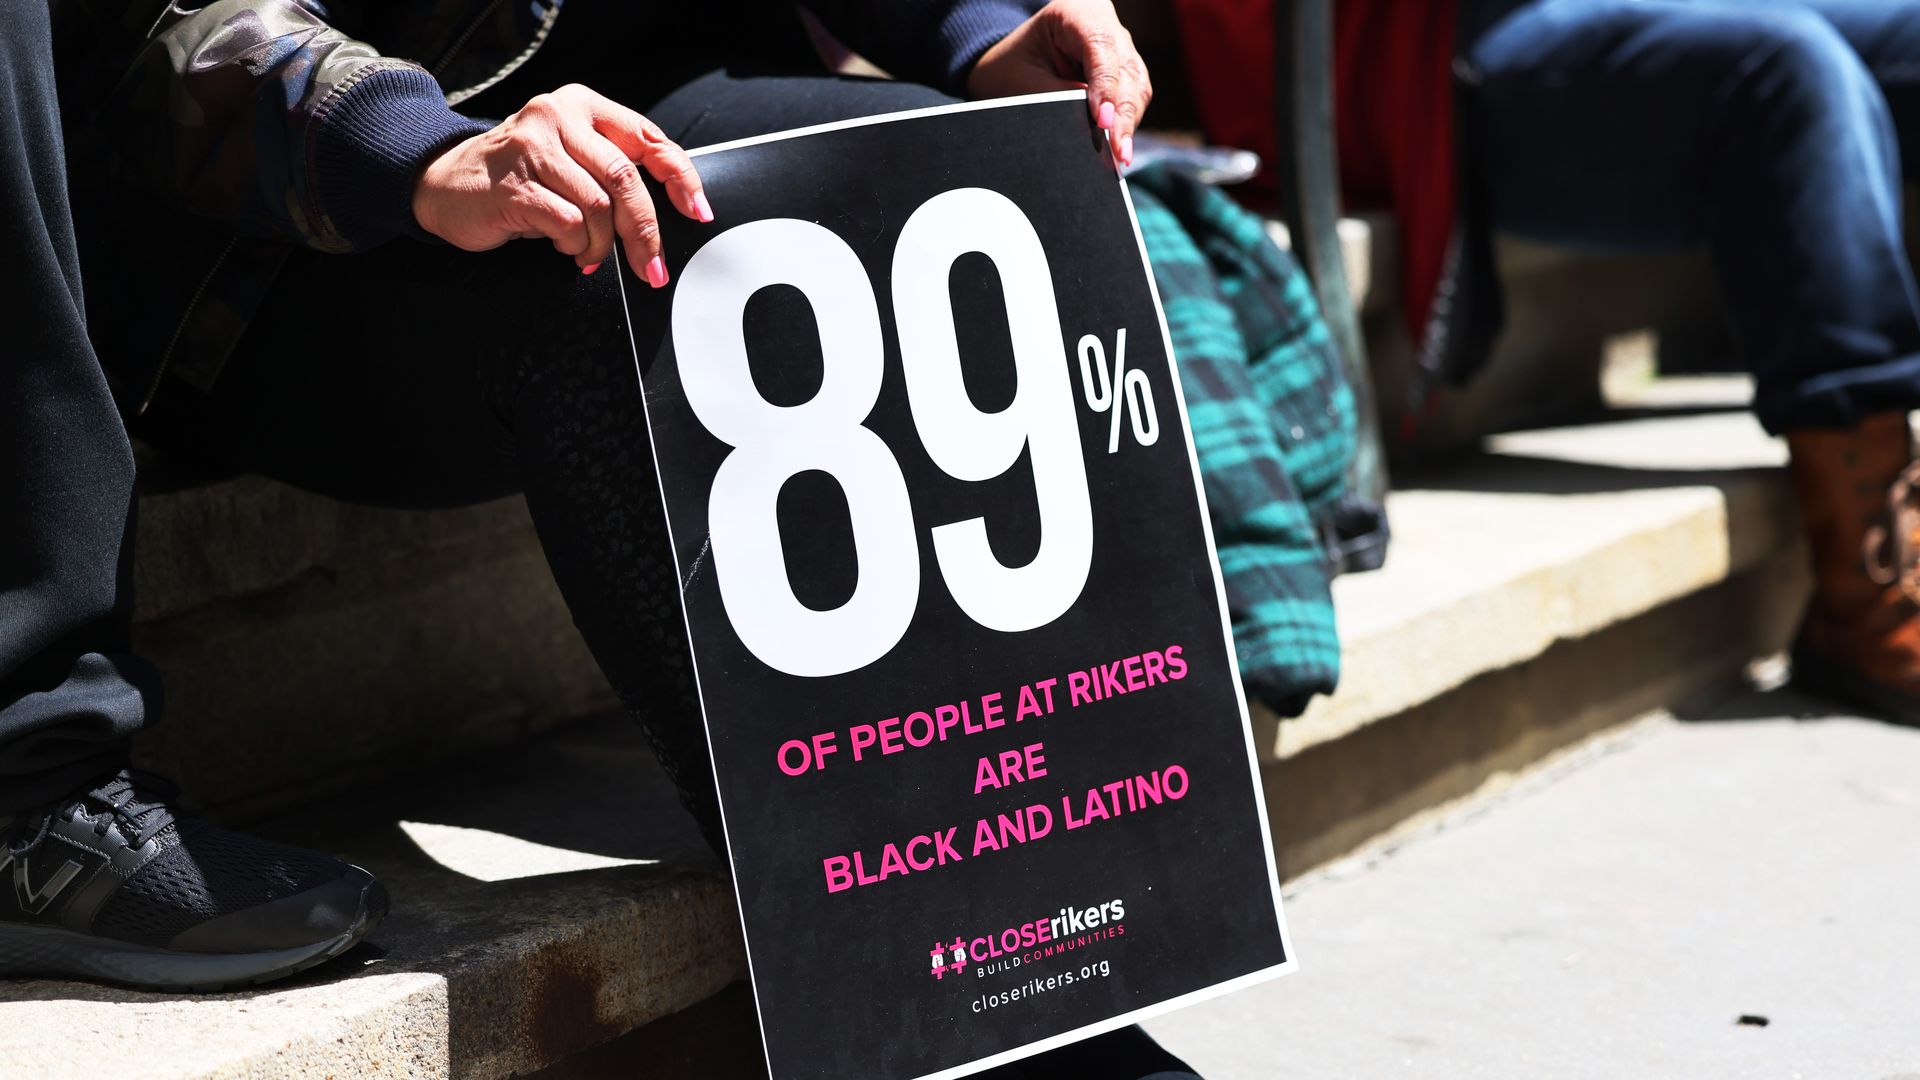 Photo of a person holding a sign that says "89% of people at Rikers are Black and Latino"